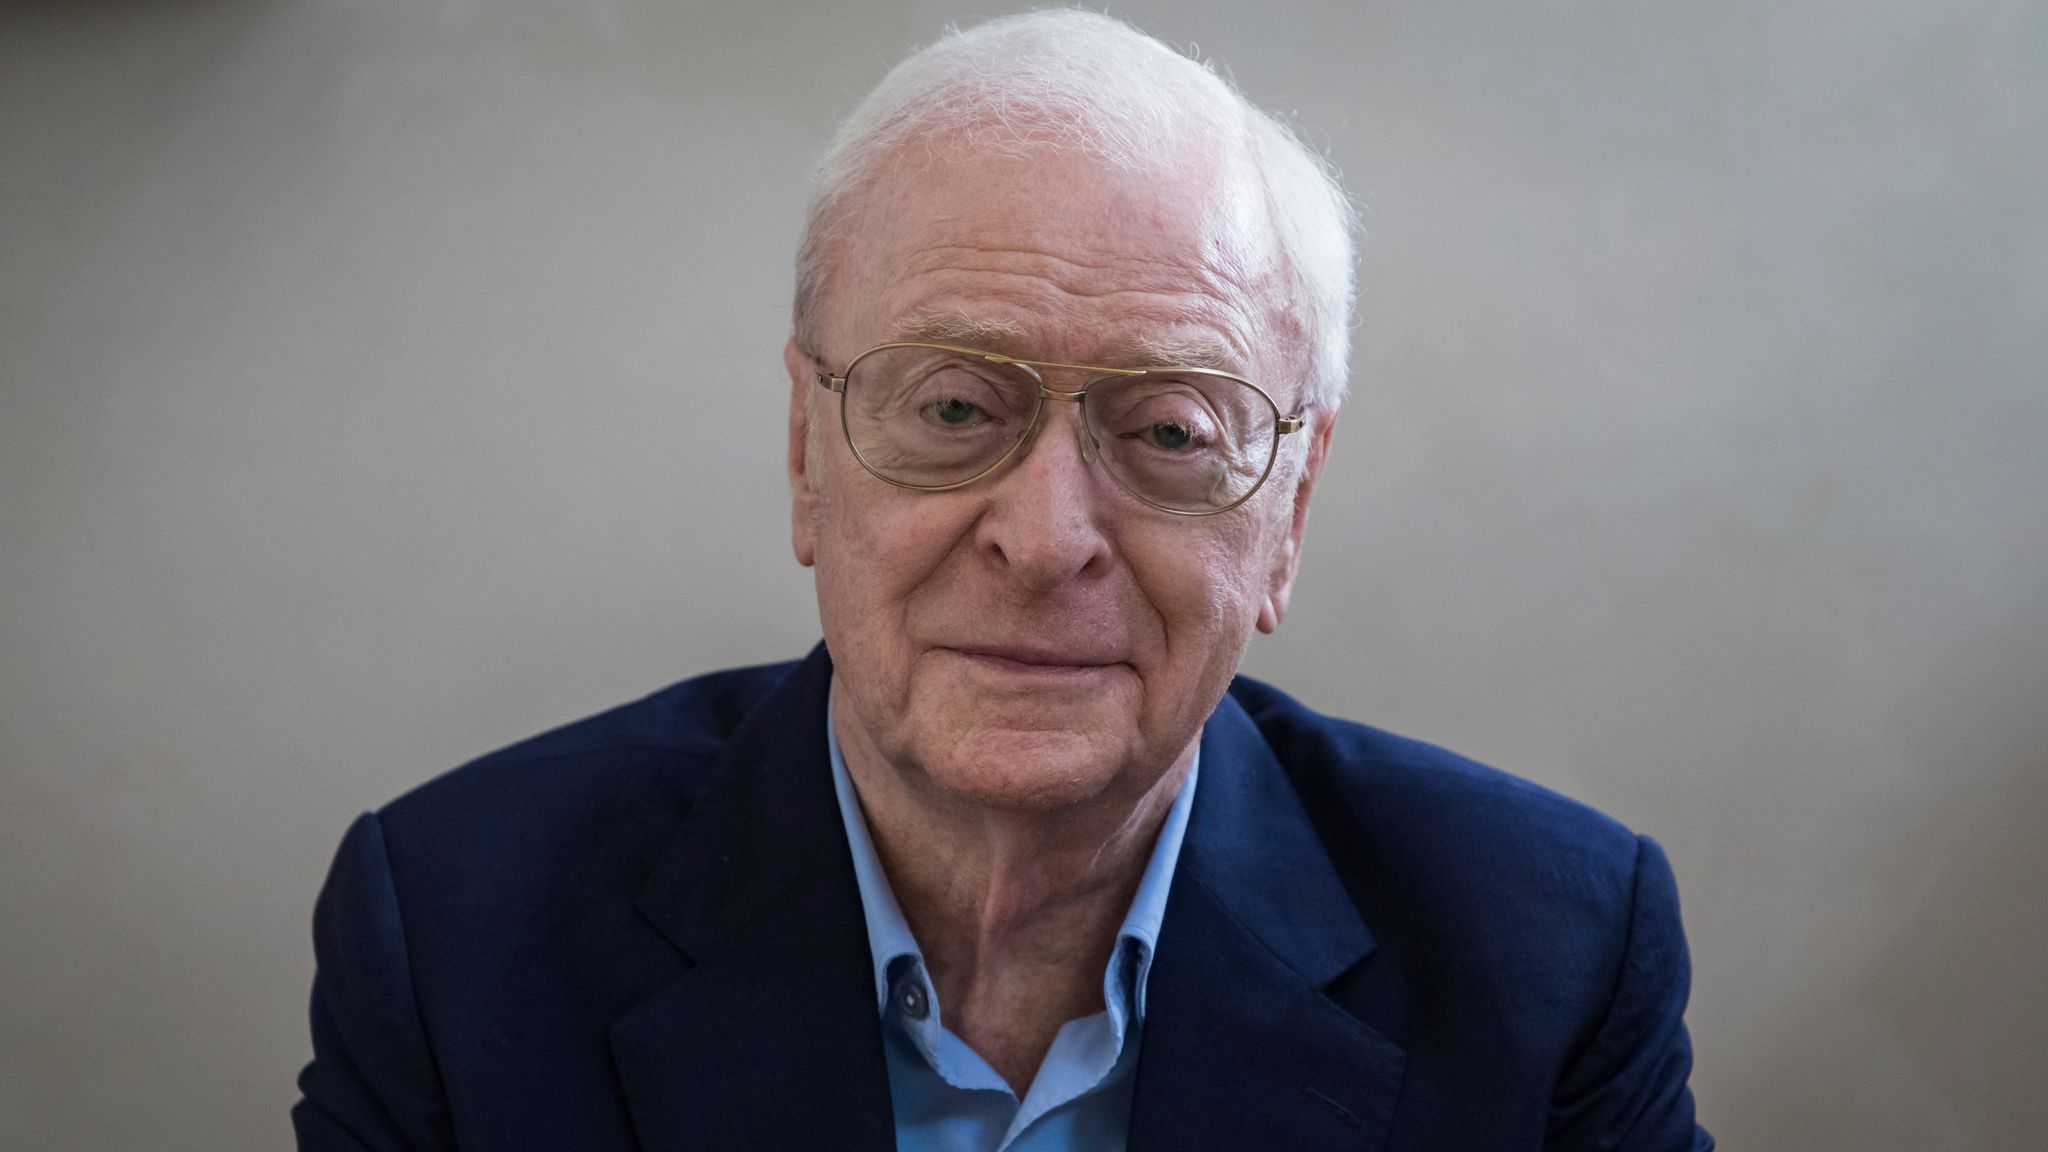 Sir Michael Caine on old age: I know my days are numbered, The Independent